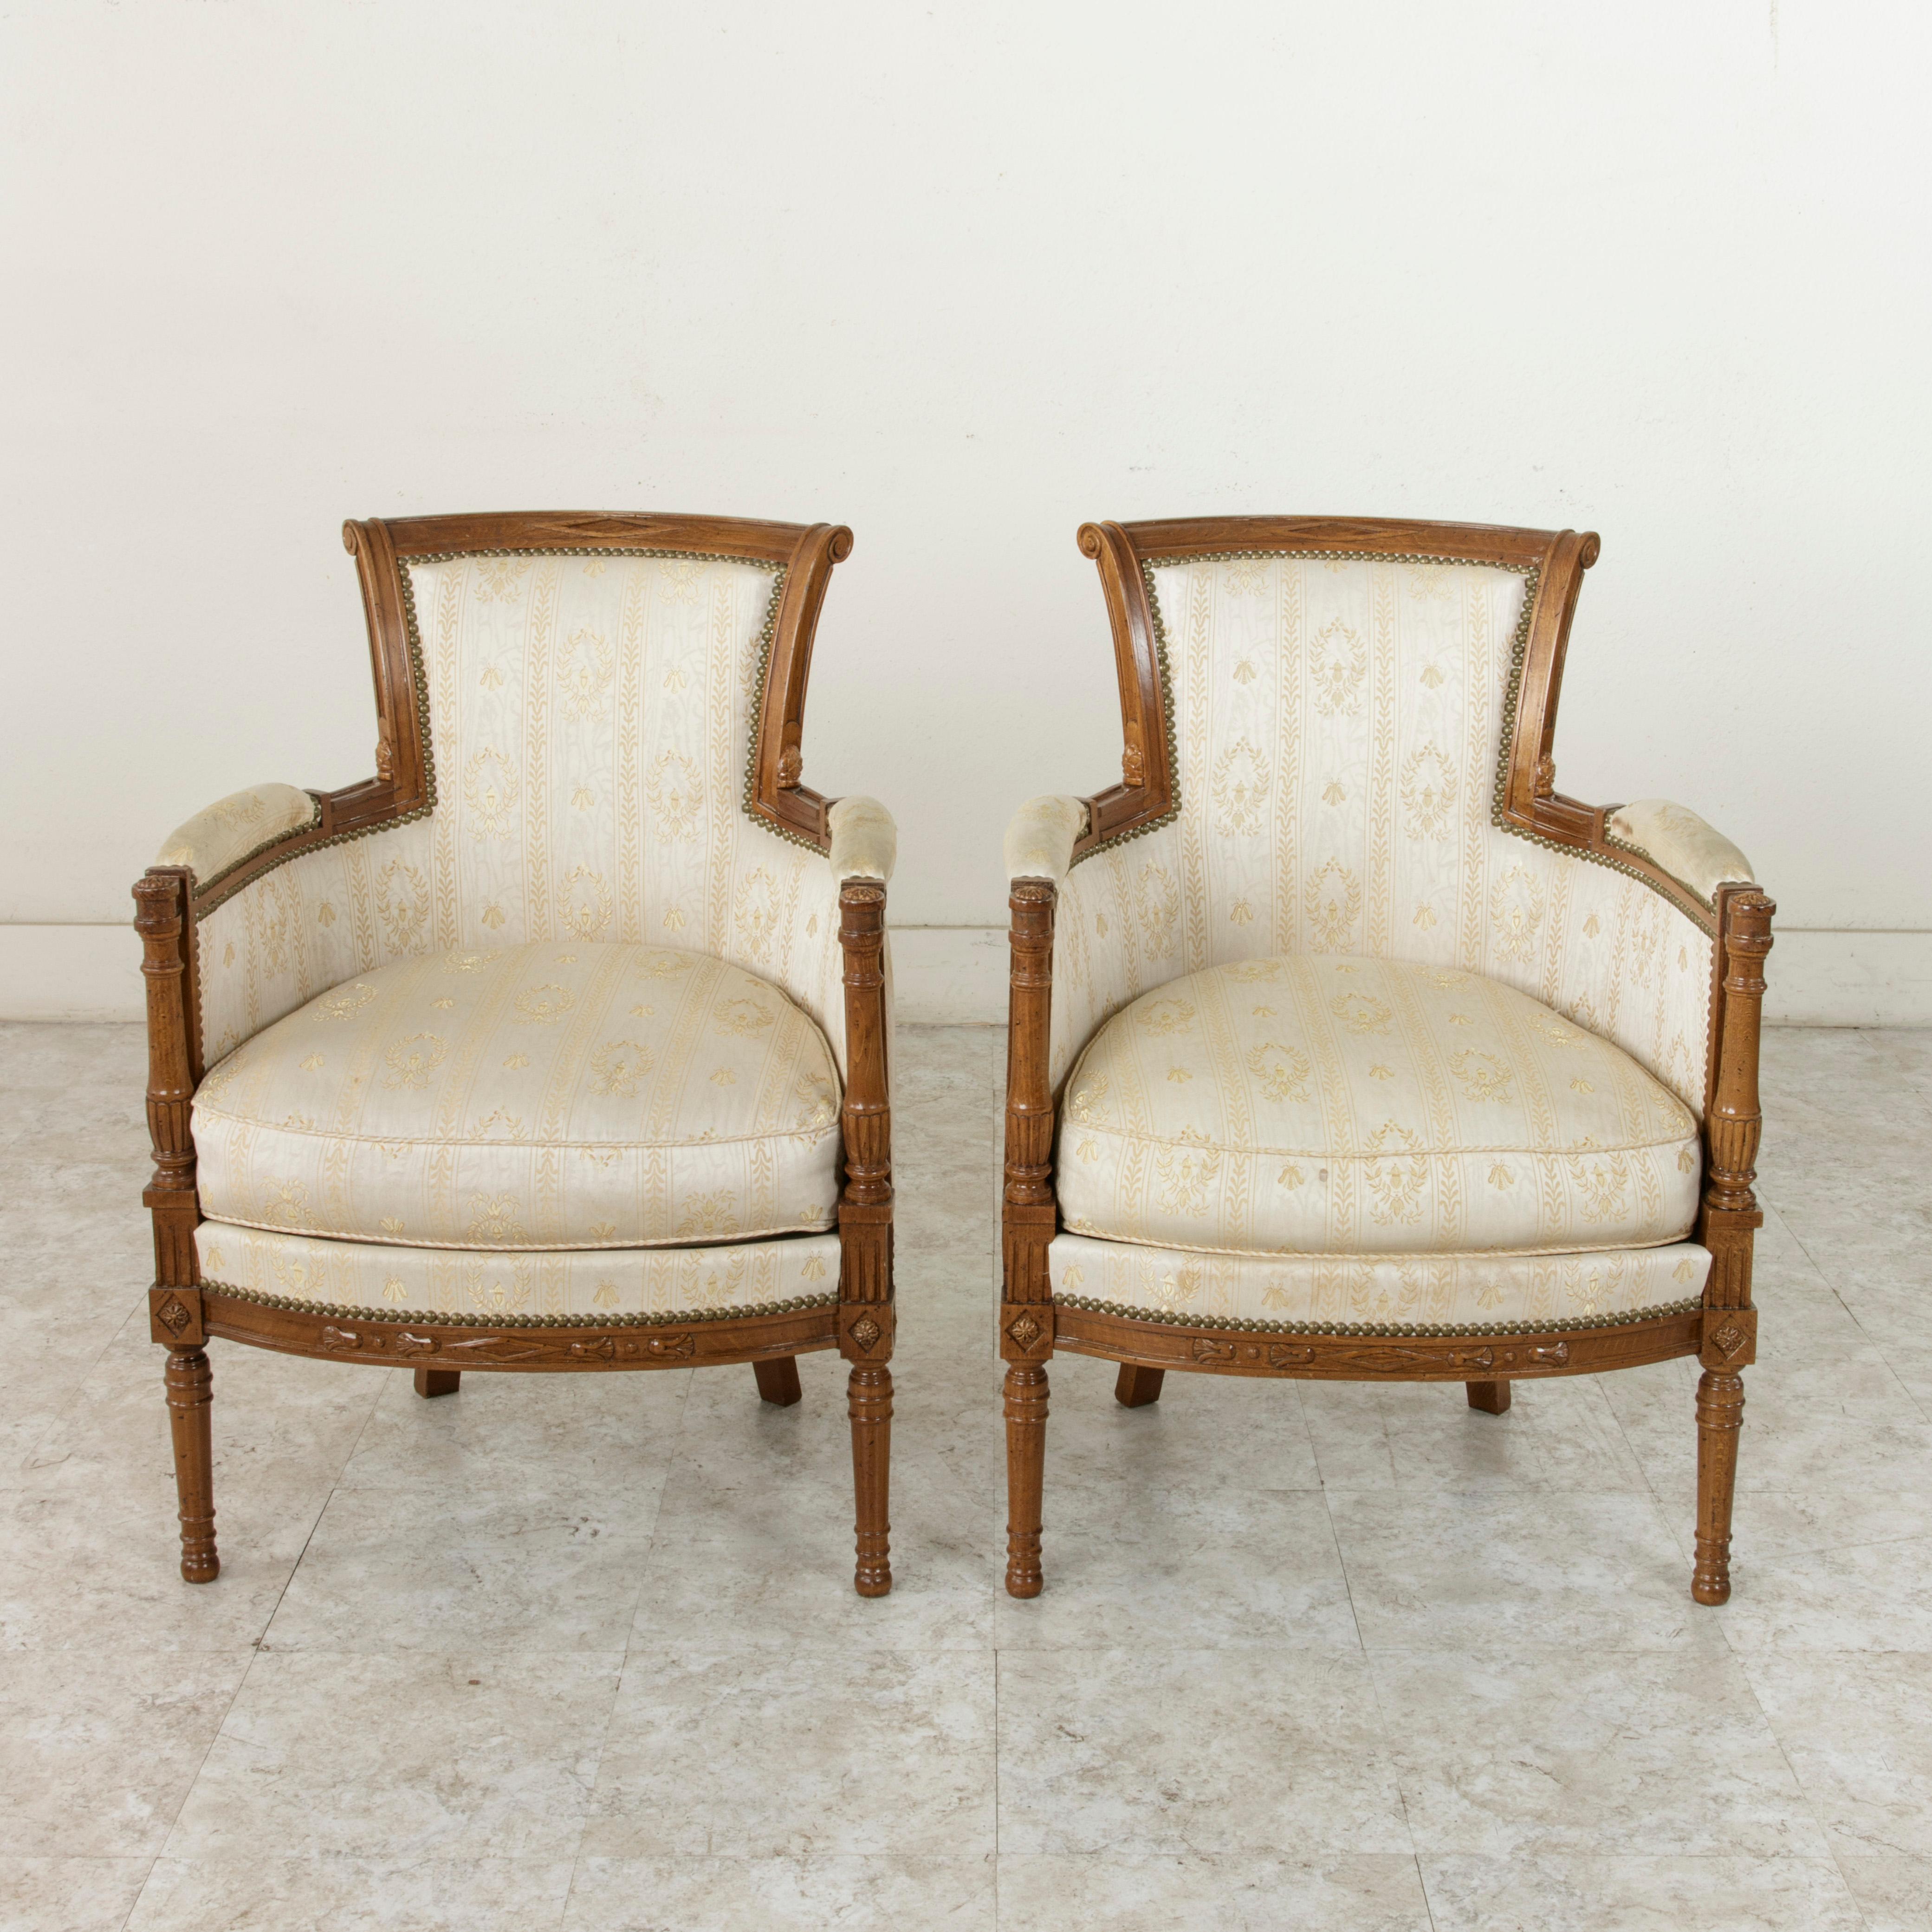 This pair of French Directoire style walnut bergères or armchairs from the turn of the 20th century features classic carved Directoire motifs of diamond shapes and rosettes. The armrests are detailed with fluted plinths and rosettes, and the front